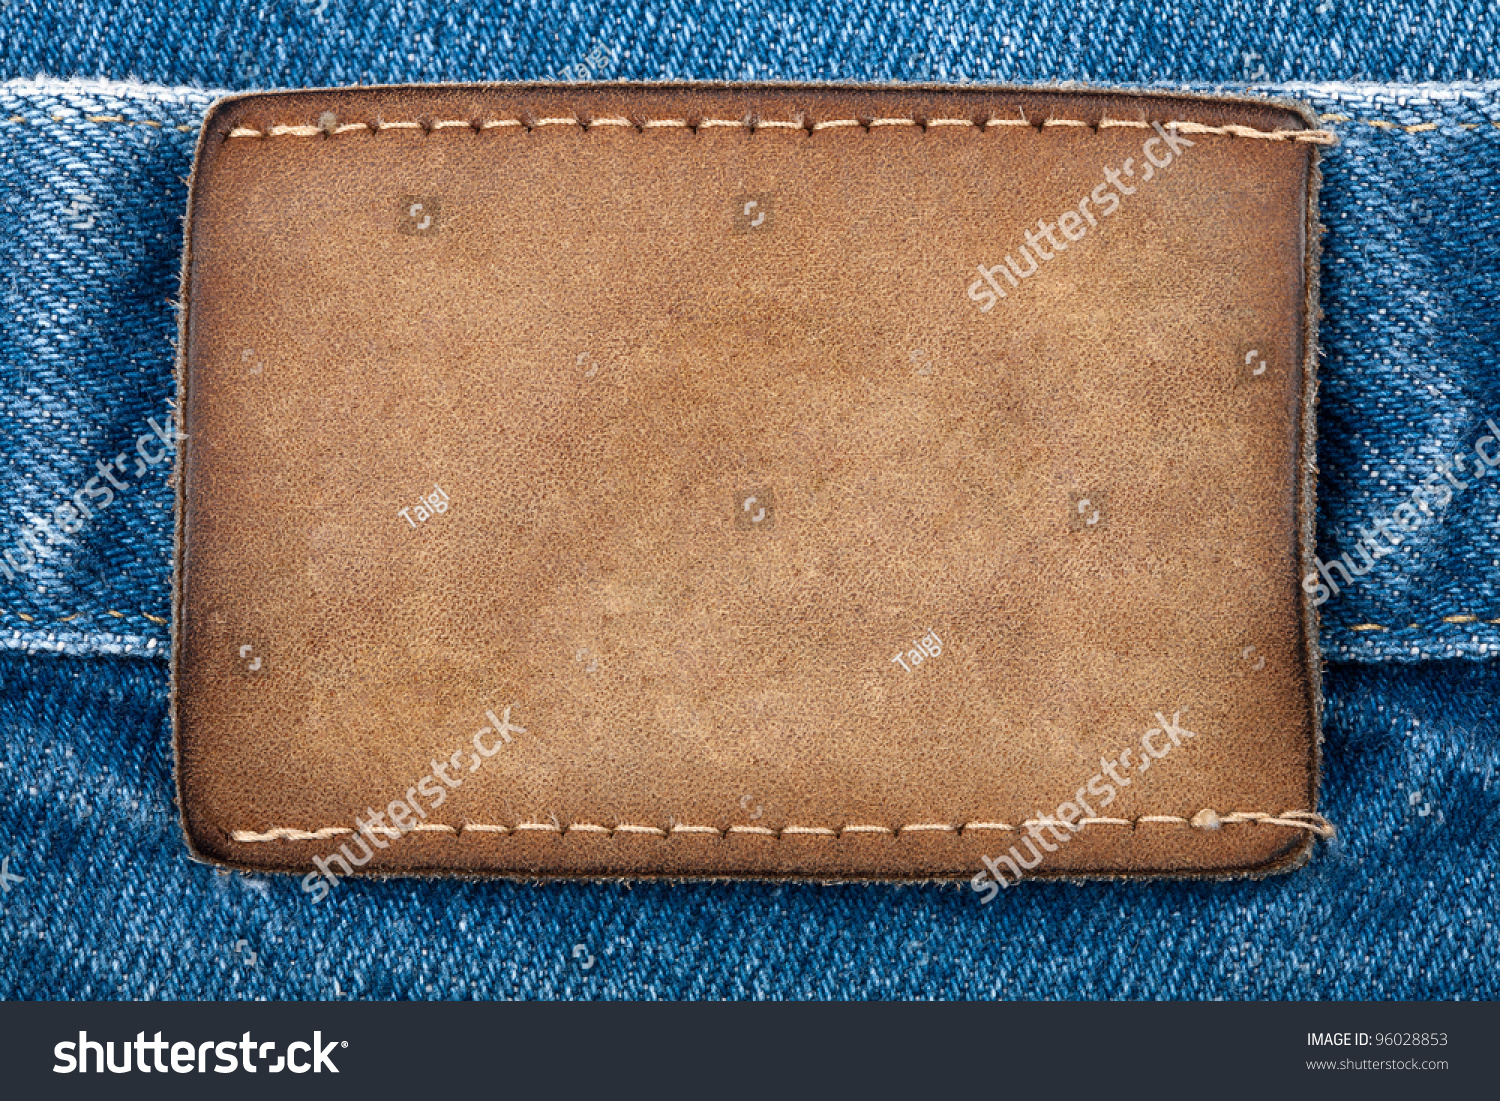 Blank Leather Jeans Label Sewed On Stock Photo 96028853 - Shutterstock